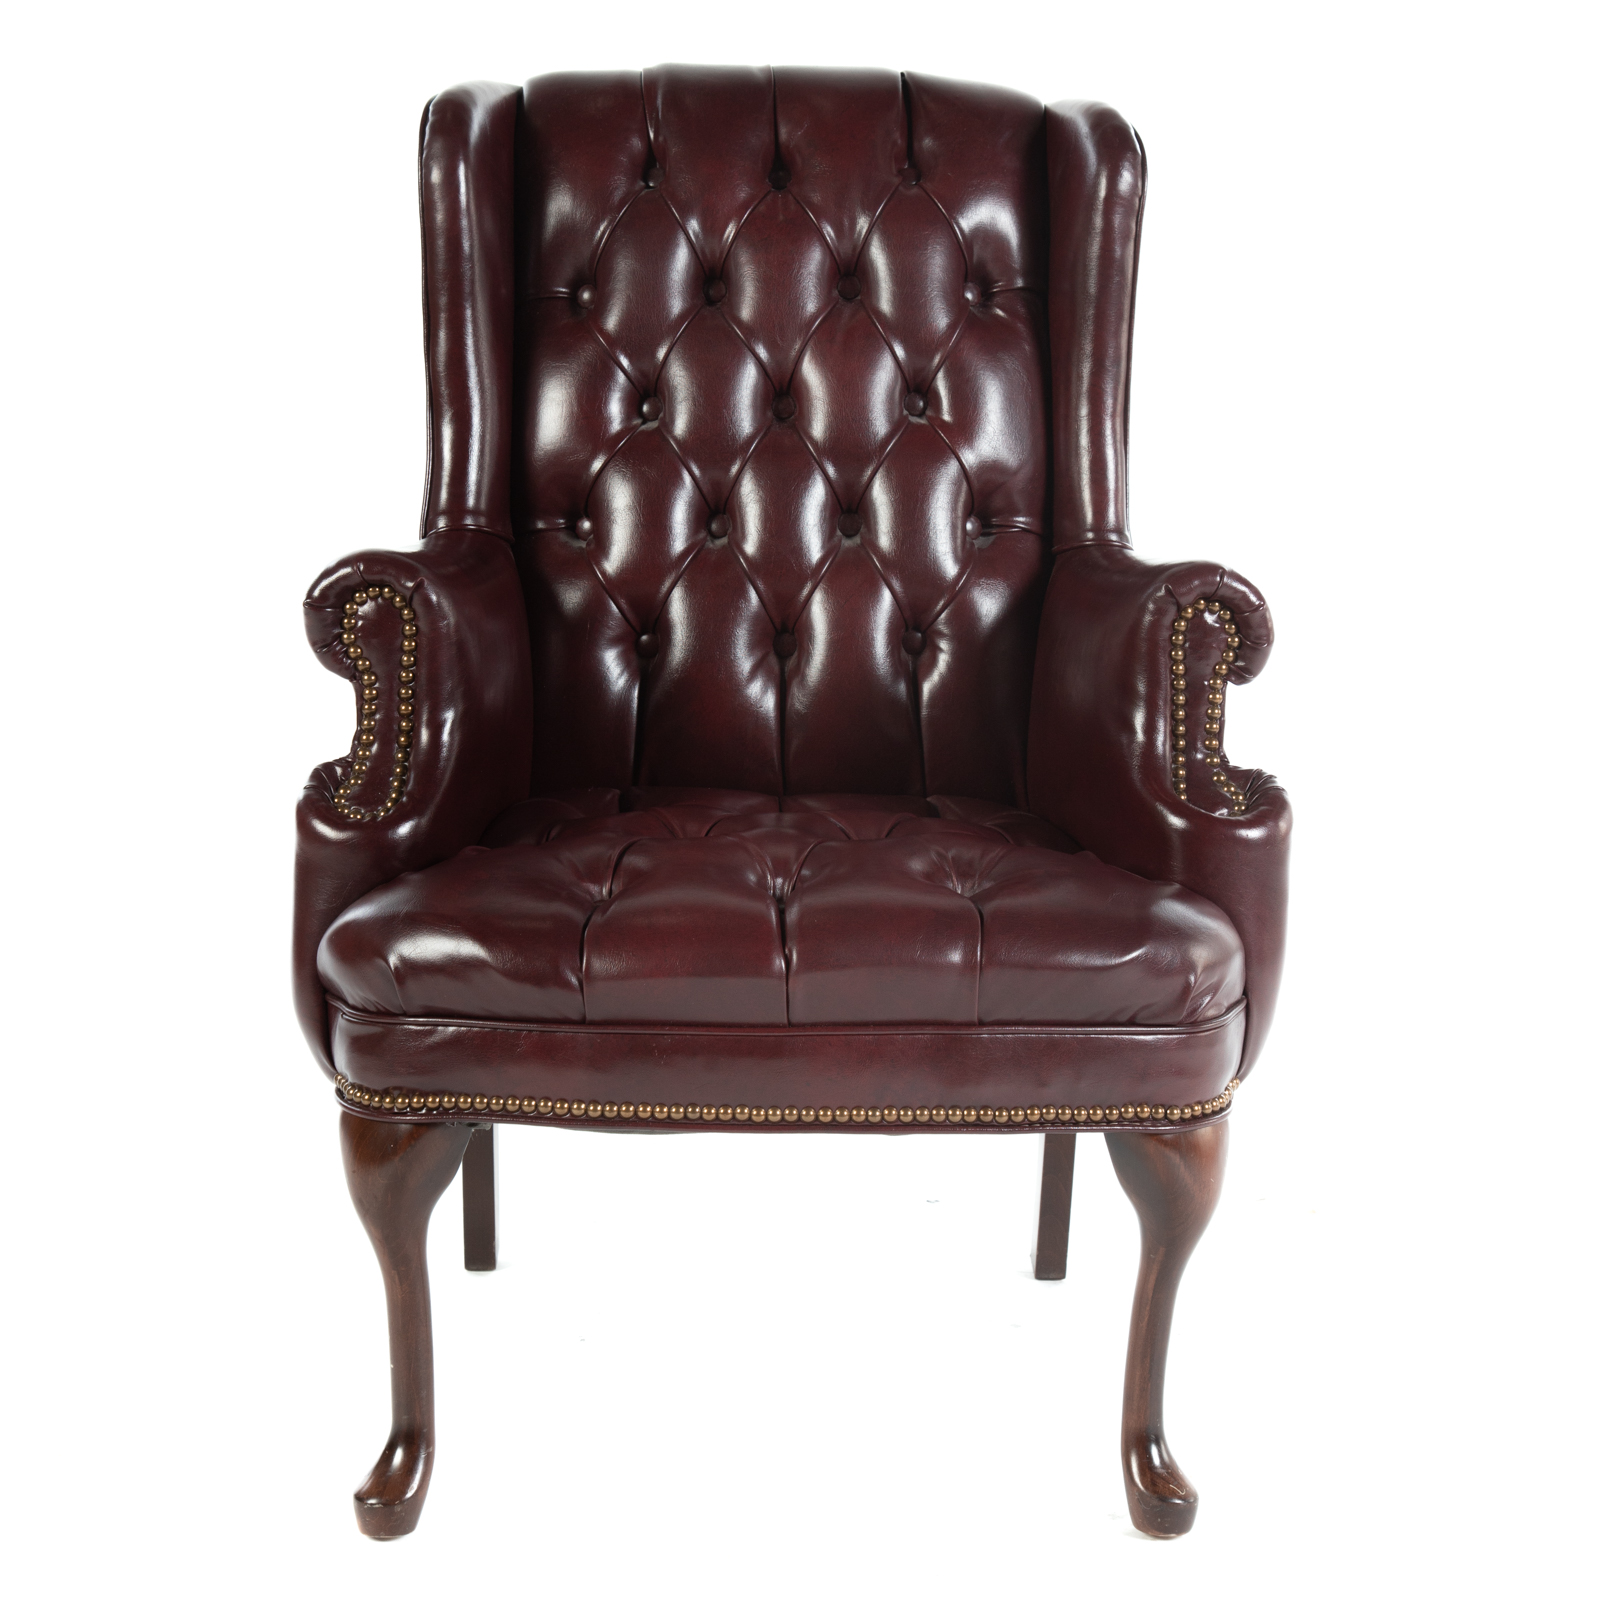 QUEEN ANNE STYLE TUFTED WING CHAIR 338e54